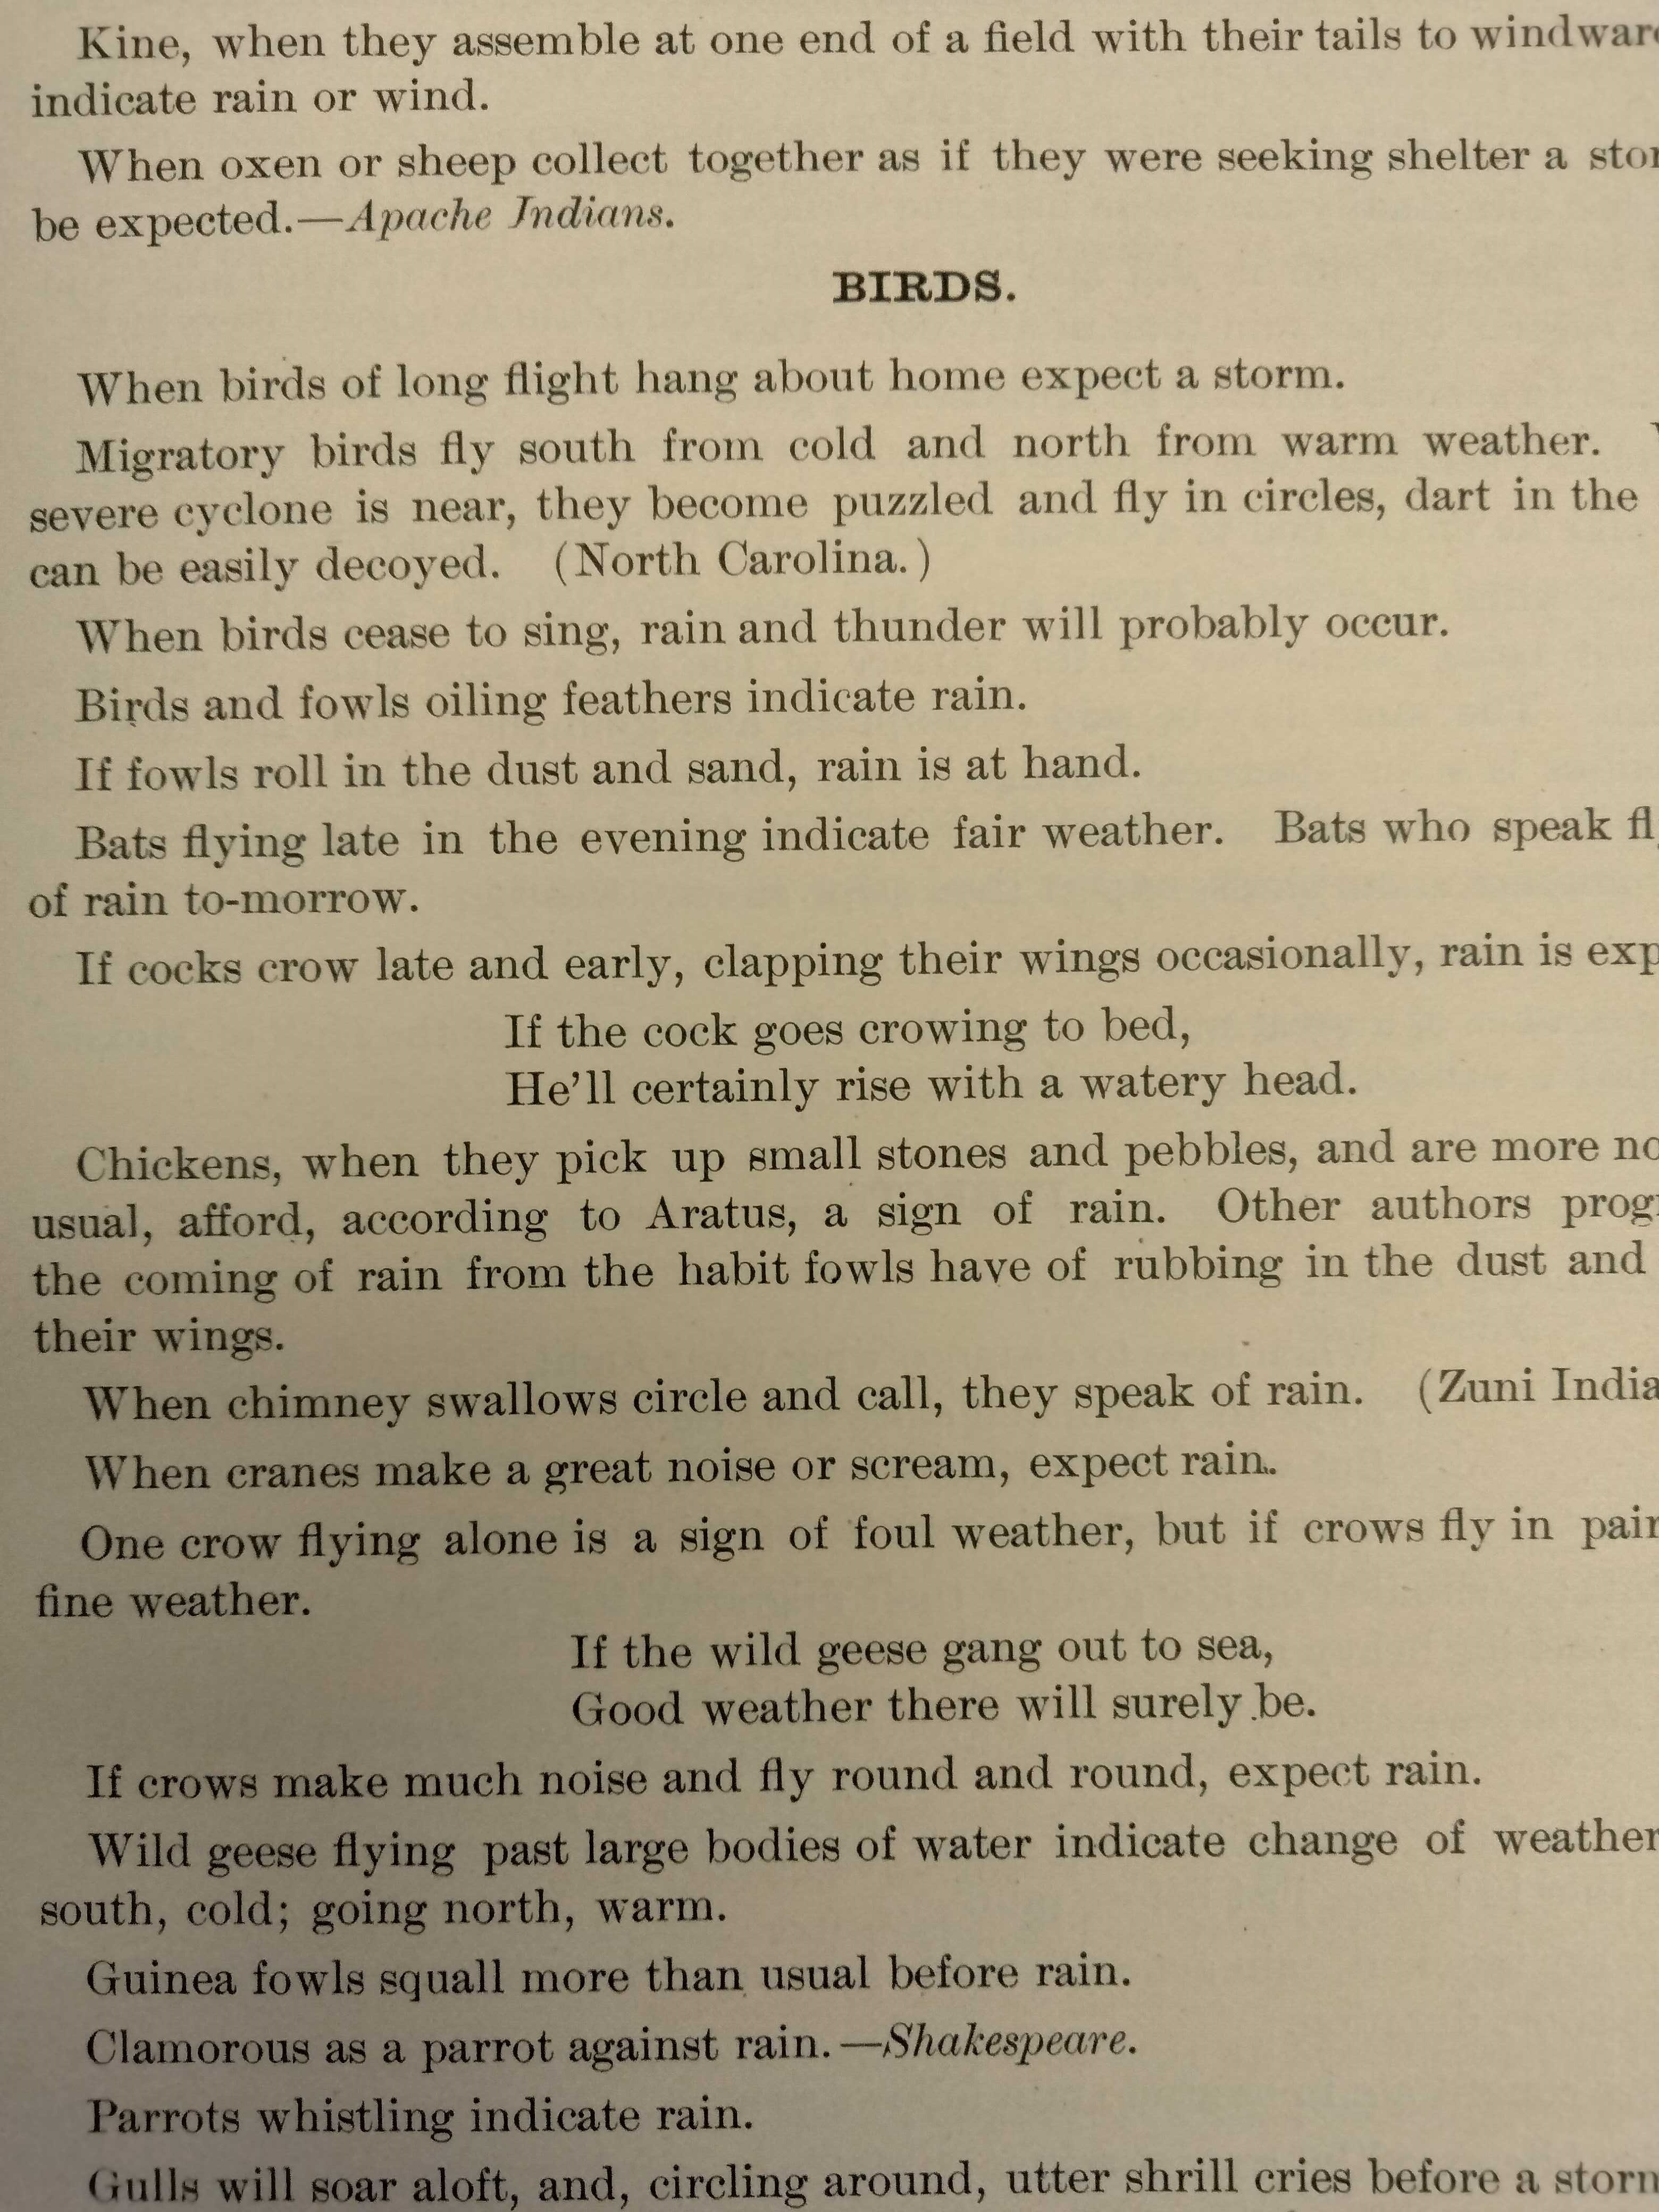 Garriott, Edward, Ed., Weather Folklore and Local Signs, 1903